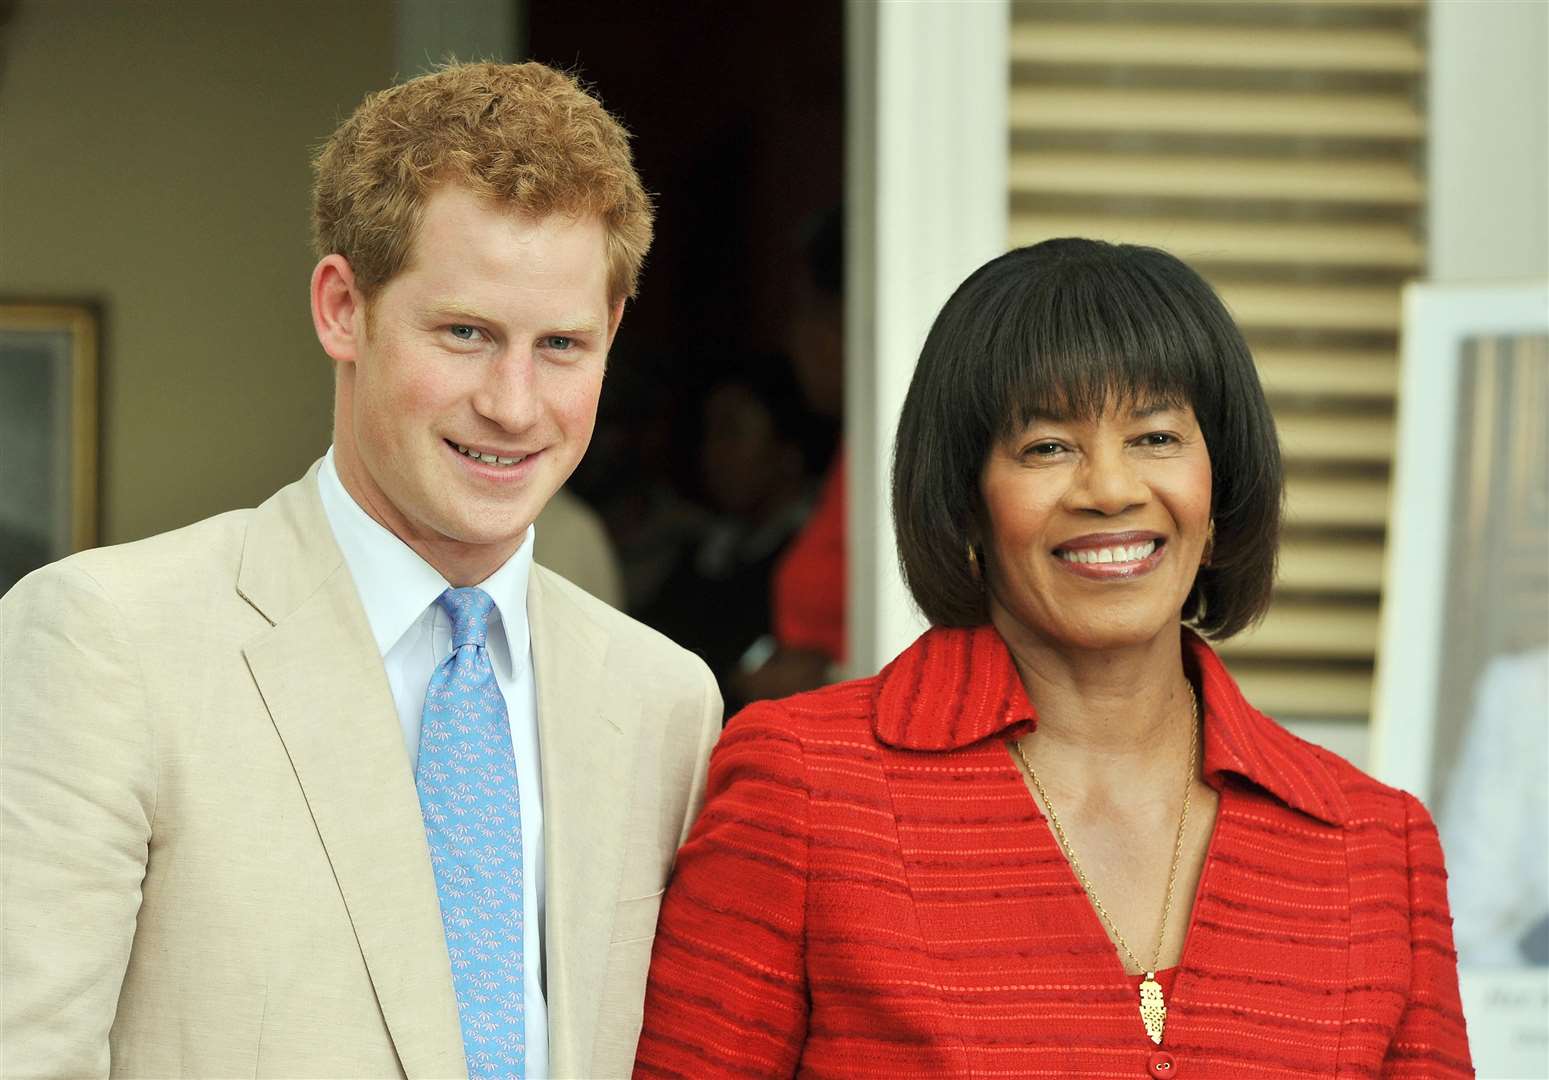 The Duke of Sussex with then PM of Jamaica Portia Simpson Miller in 2010 (John Stillwell/PA)